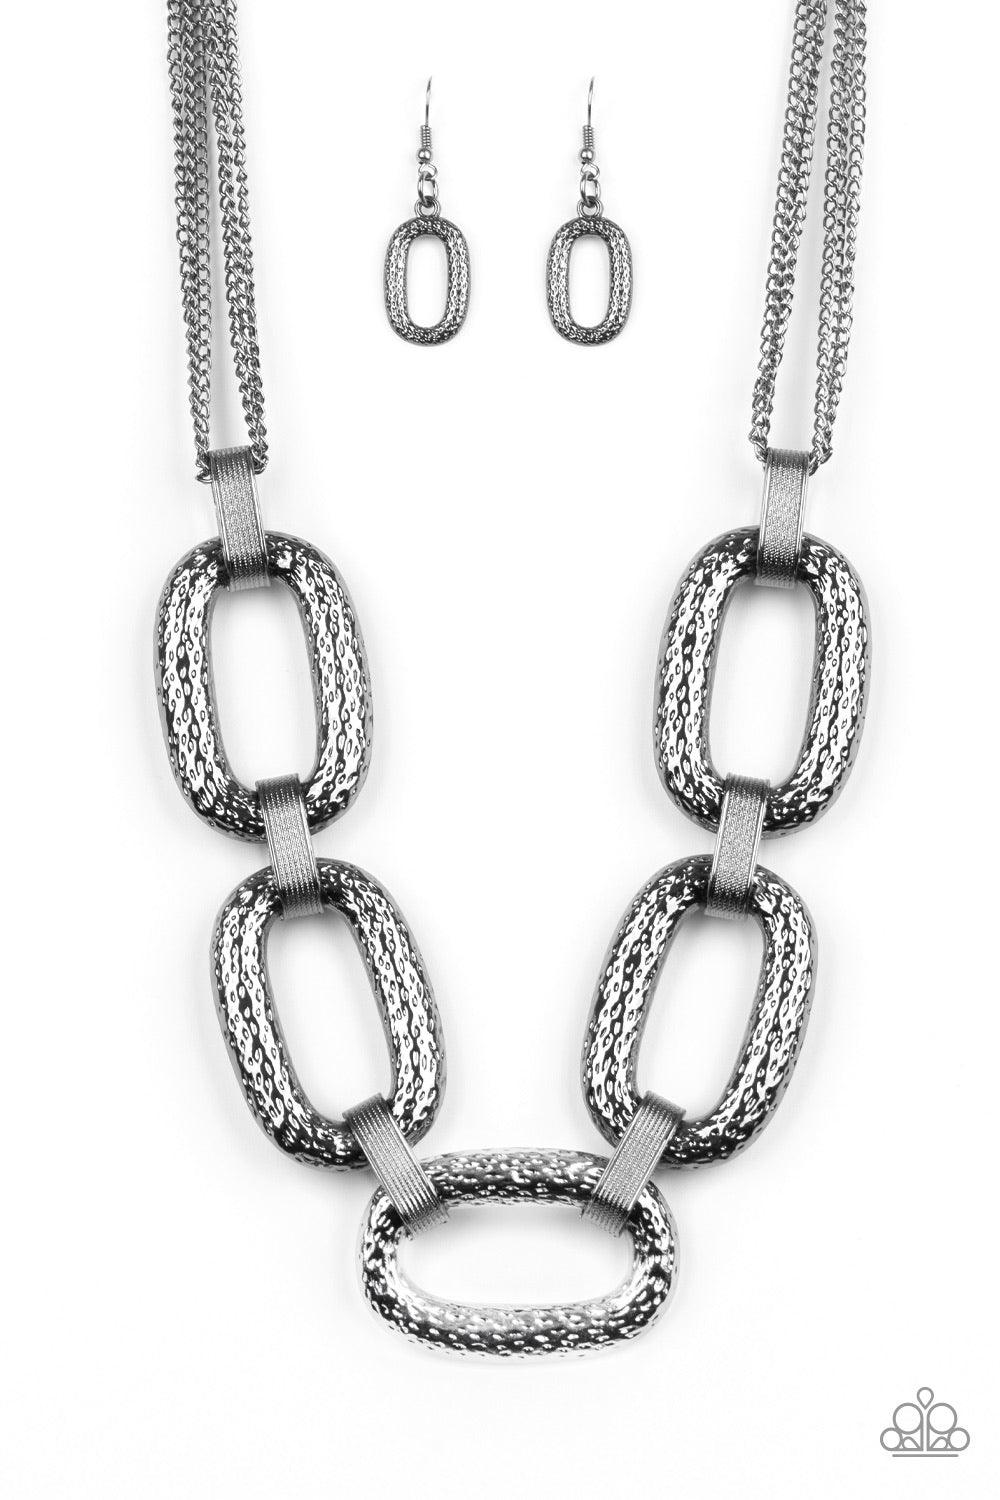 Paparazzi Accessories Take Charge - Black Delicately hammered in blinding shimmer, oversized shiny gunmetal chain links and textured fittings connect below the collar. Suspended from strands of gunmetal chains, the bold links catch and reflect the light f